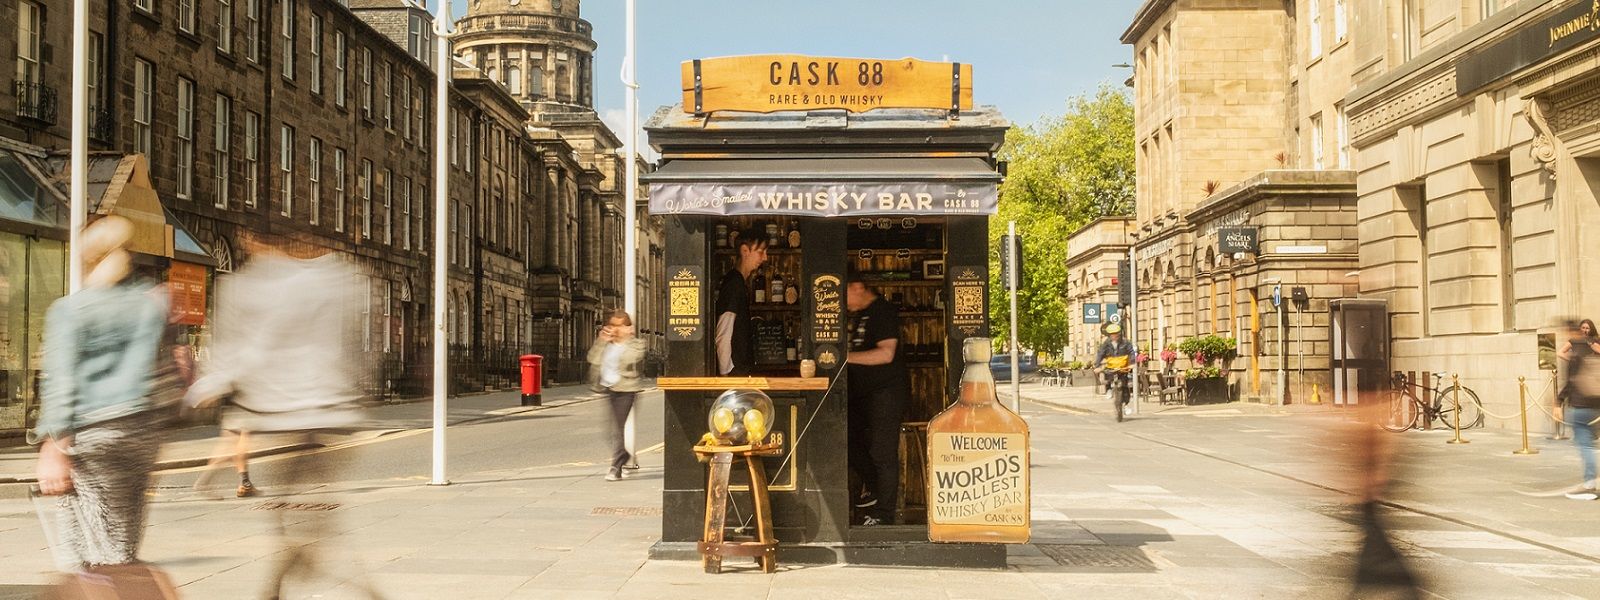 Cask 88 Presents The World's Smallest Whisky Bar